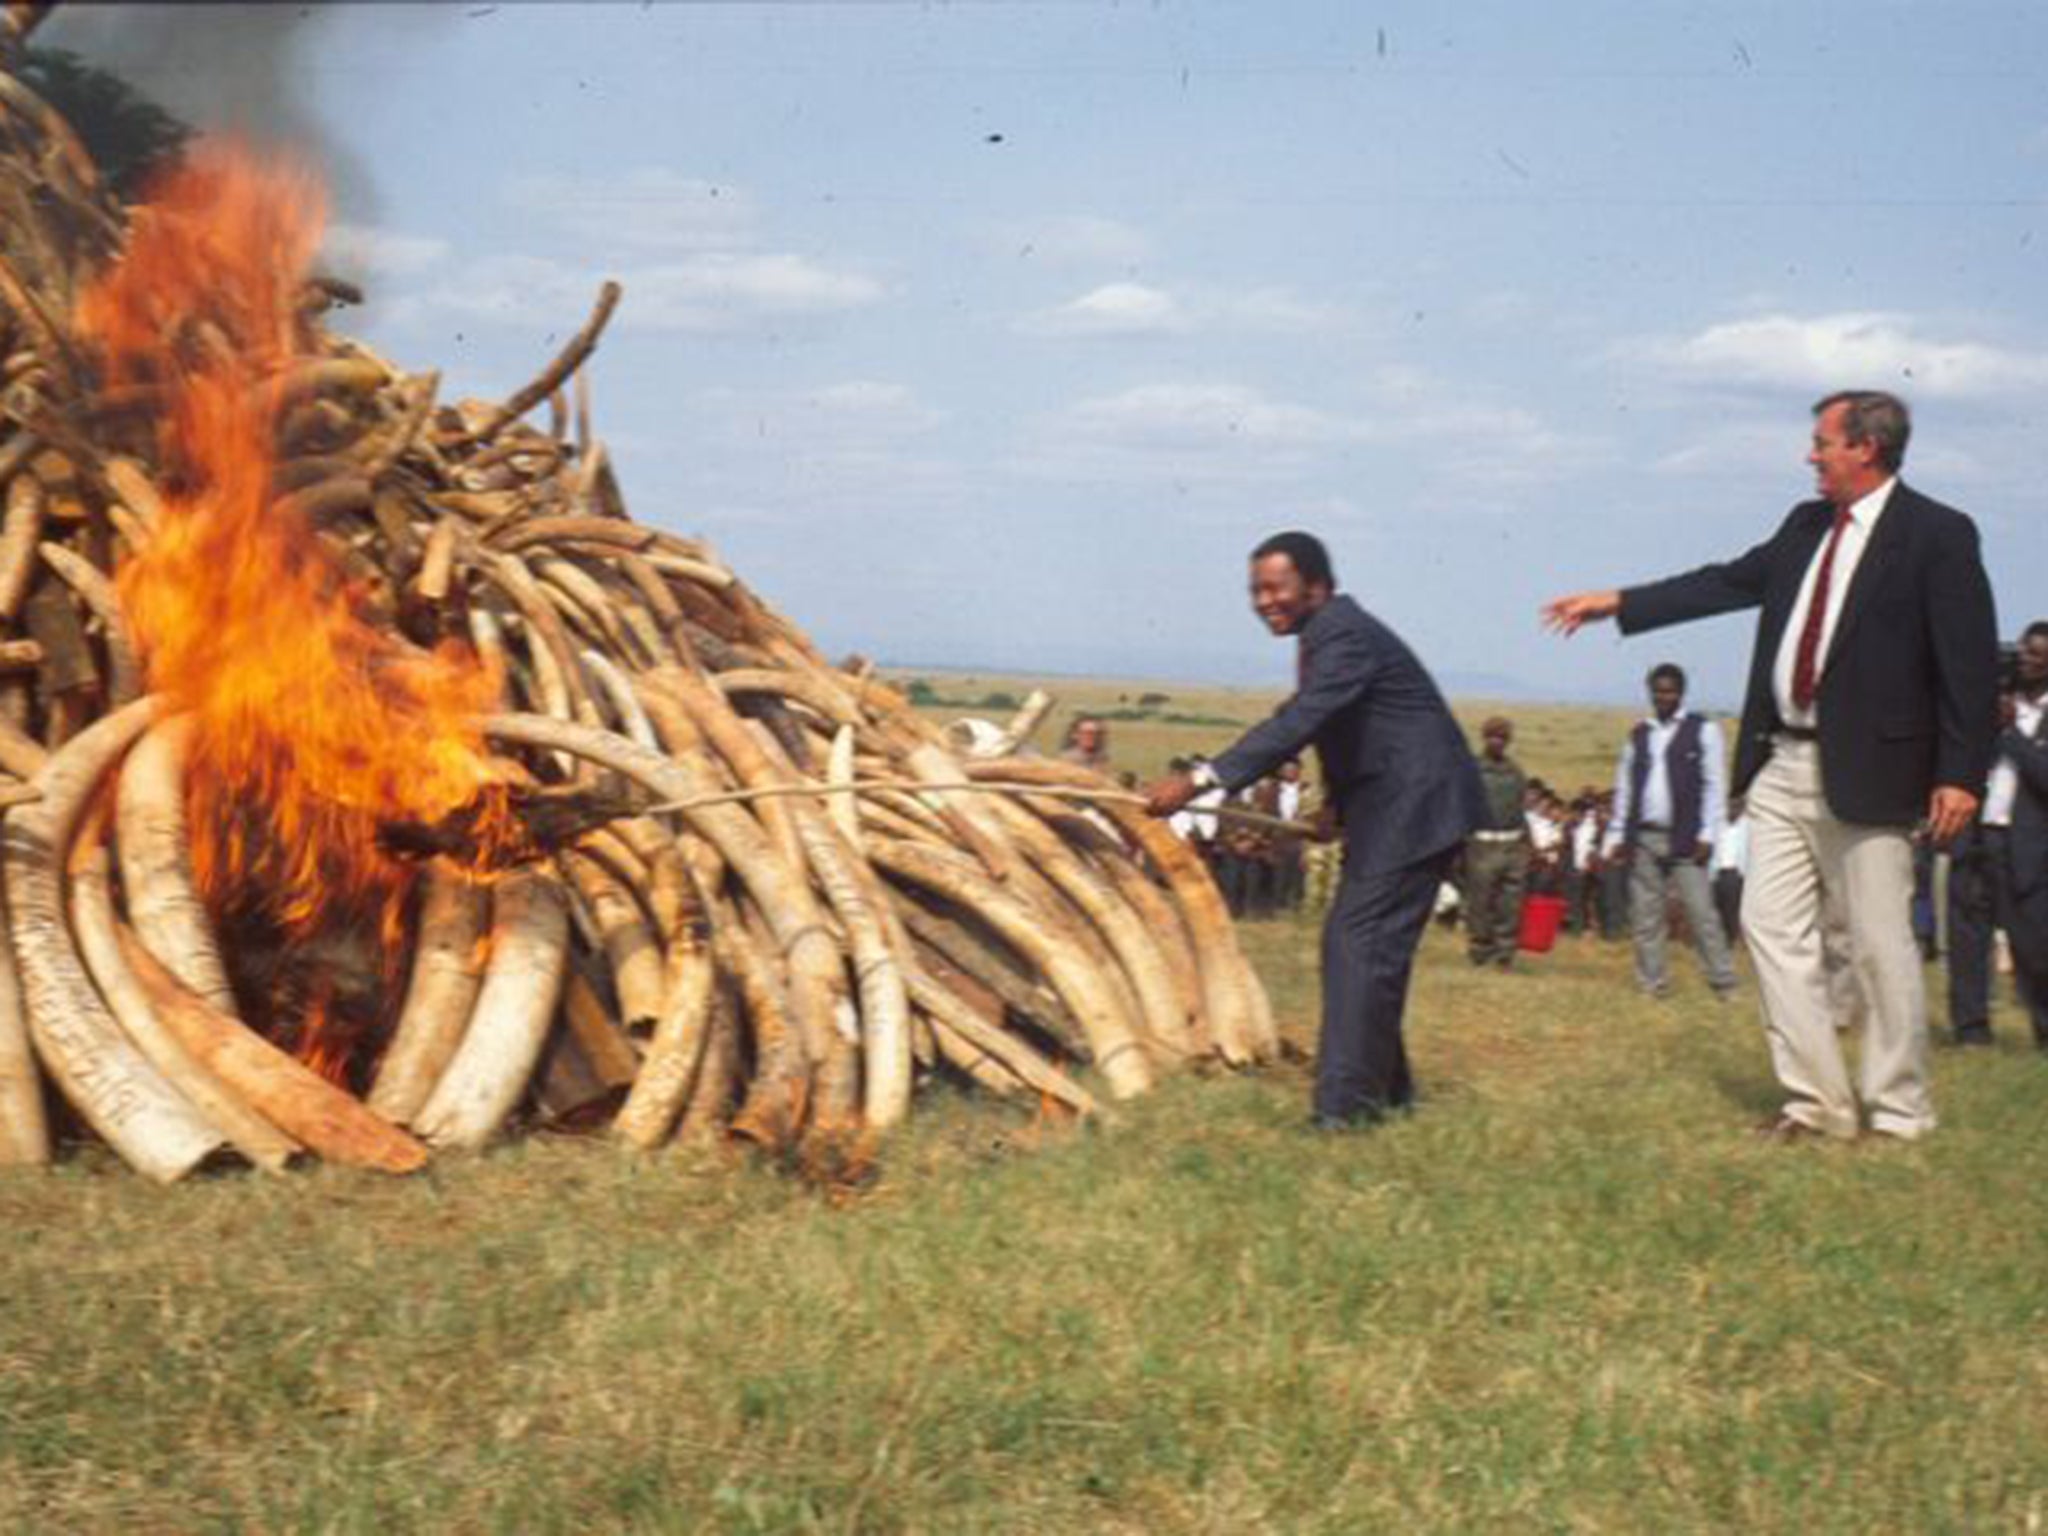 Richard Leakey witnessing the burning of ivory in Kenya. As many as 40,000 elephants are being killed across the continent of Africa every year